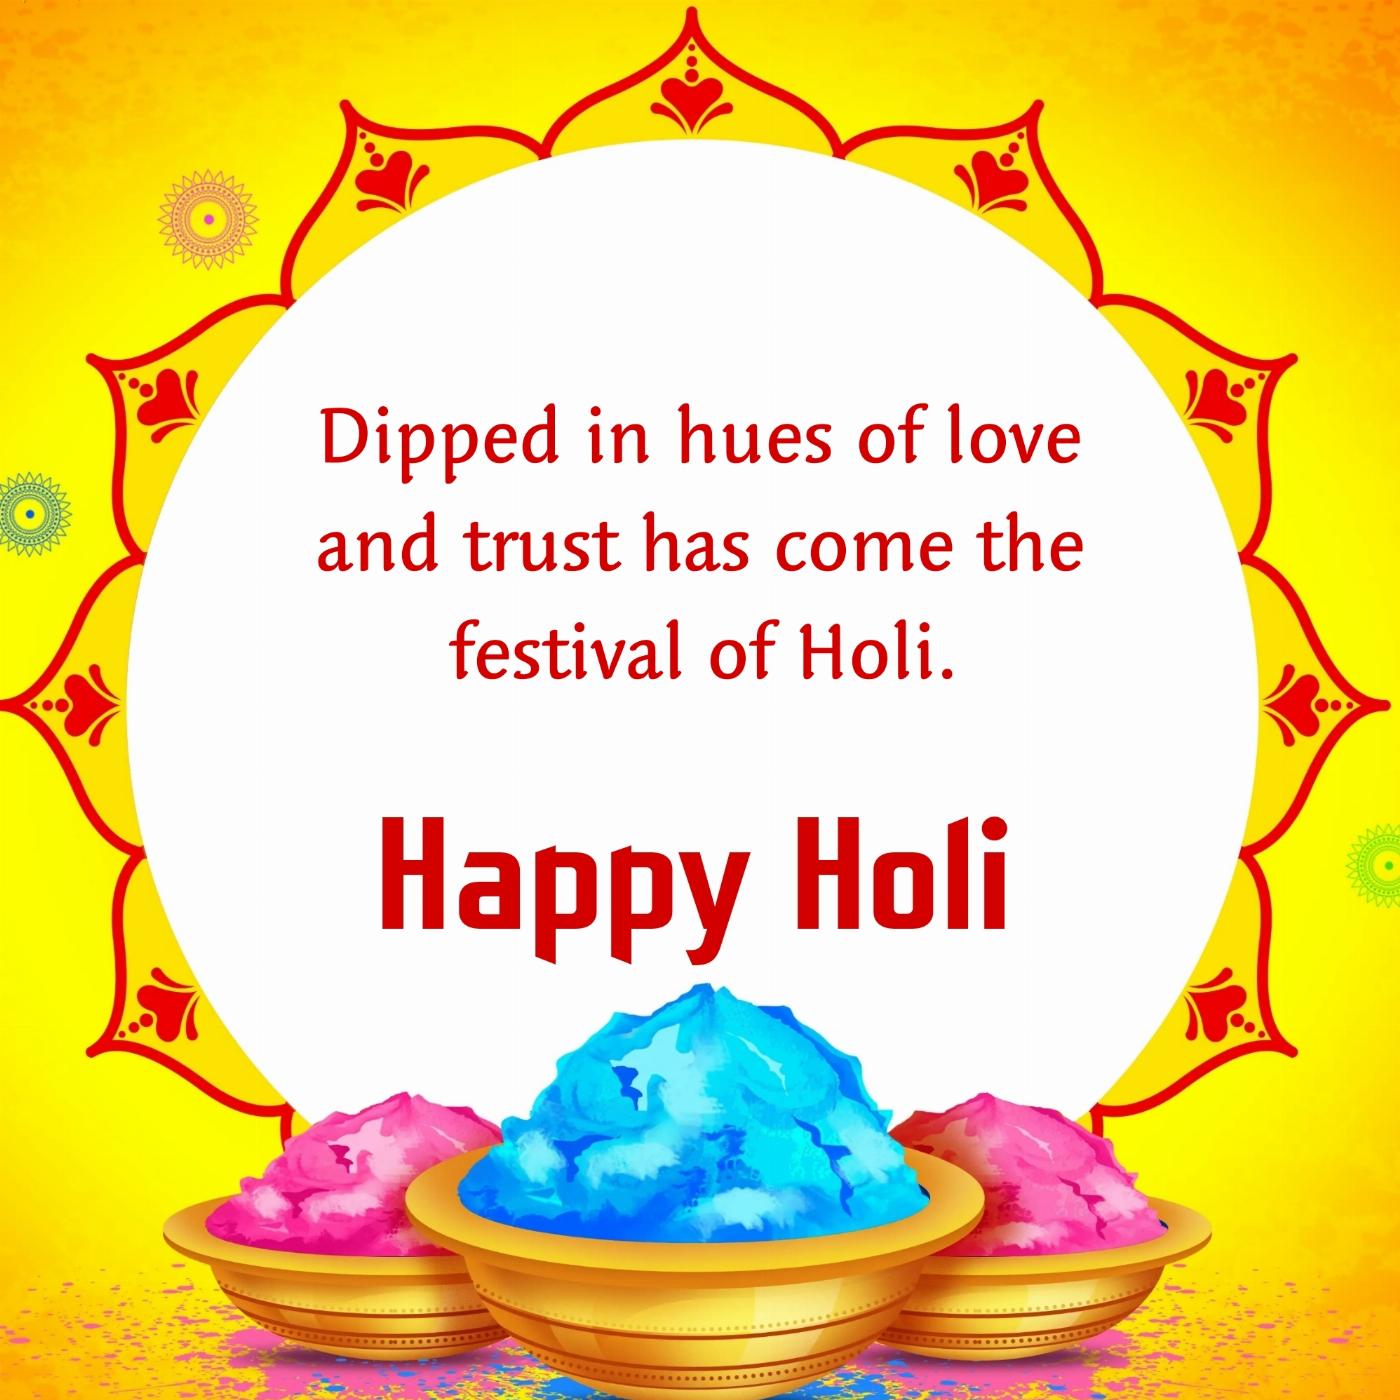 Dipped in hues of love and trust has come the festival of Holi